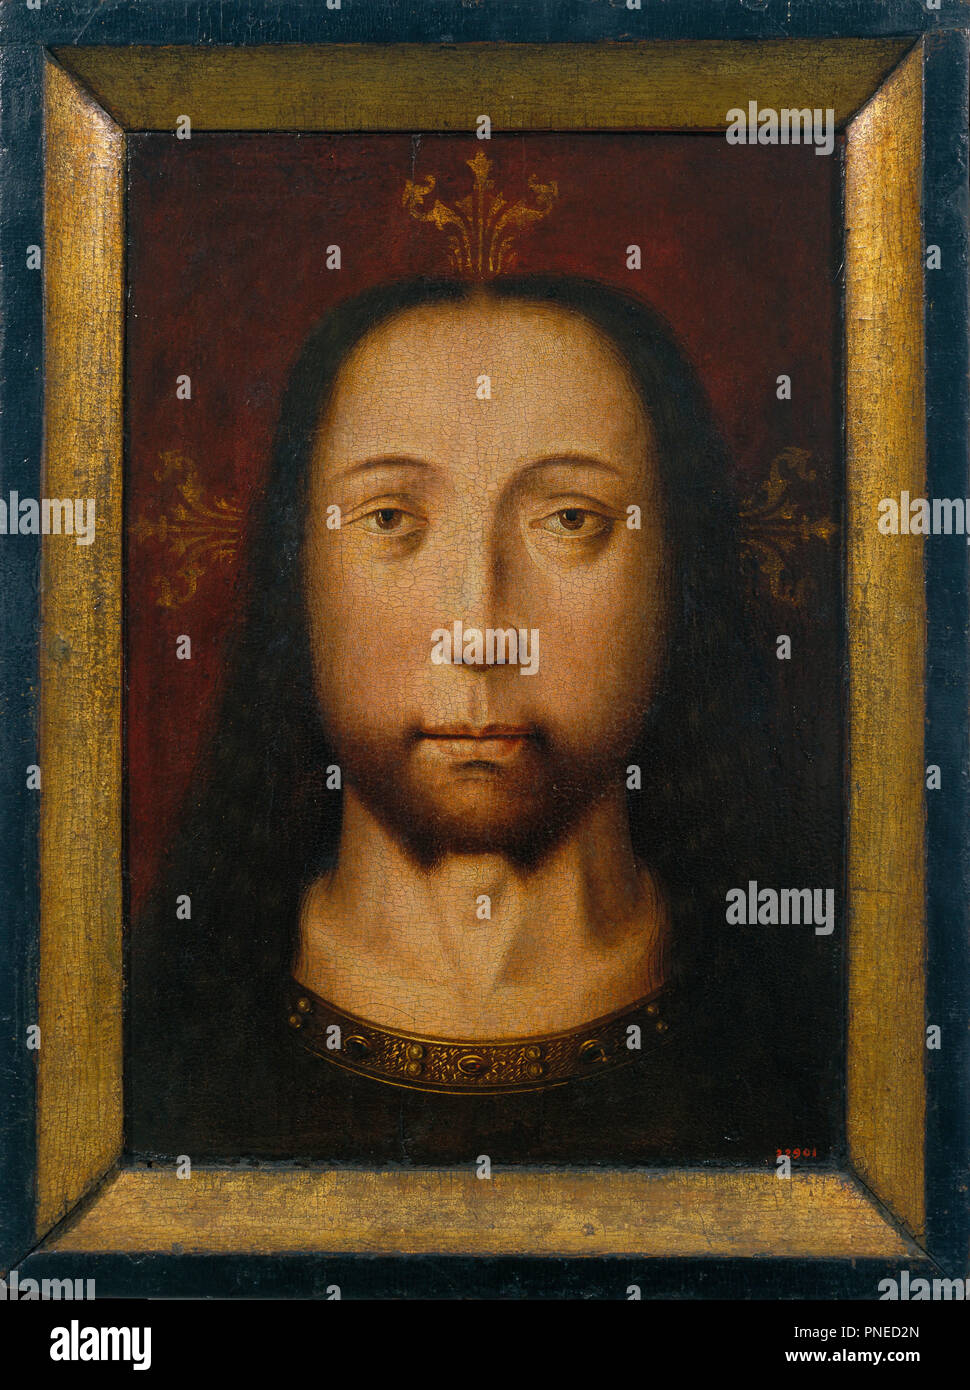 Holy Countenance. Date/Period: Ca. 1500. Painting. Oil on wood. Height: 374 mm (14.72 in); Width: 282 mm (11.10 in). Author: Circle of Albert Bouts. BOUTS, AELBRECHT. Stock Photo